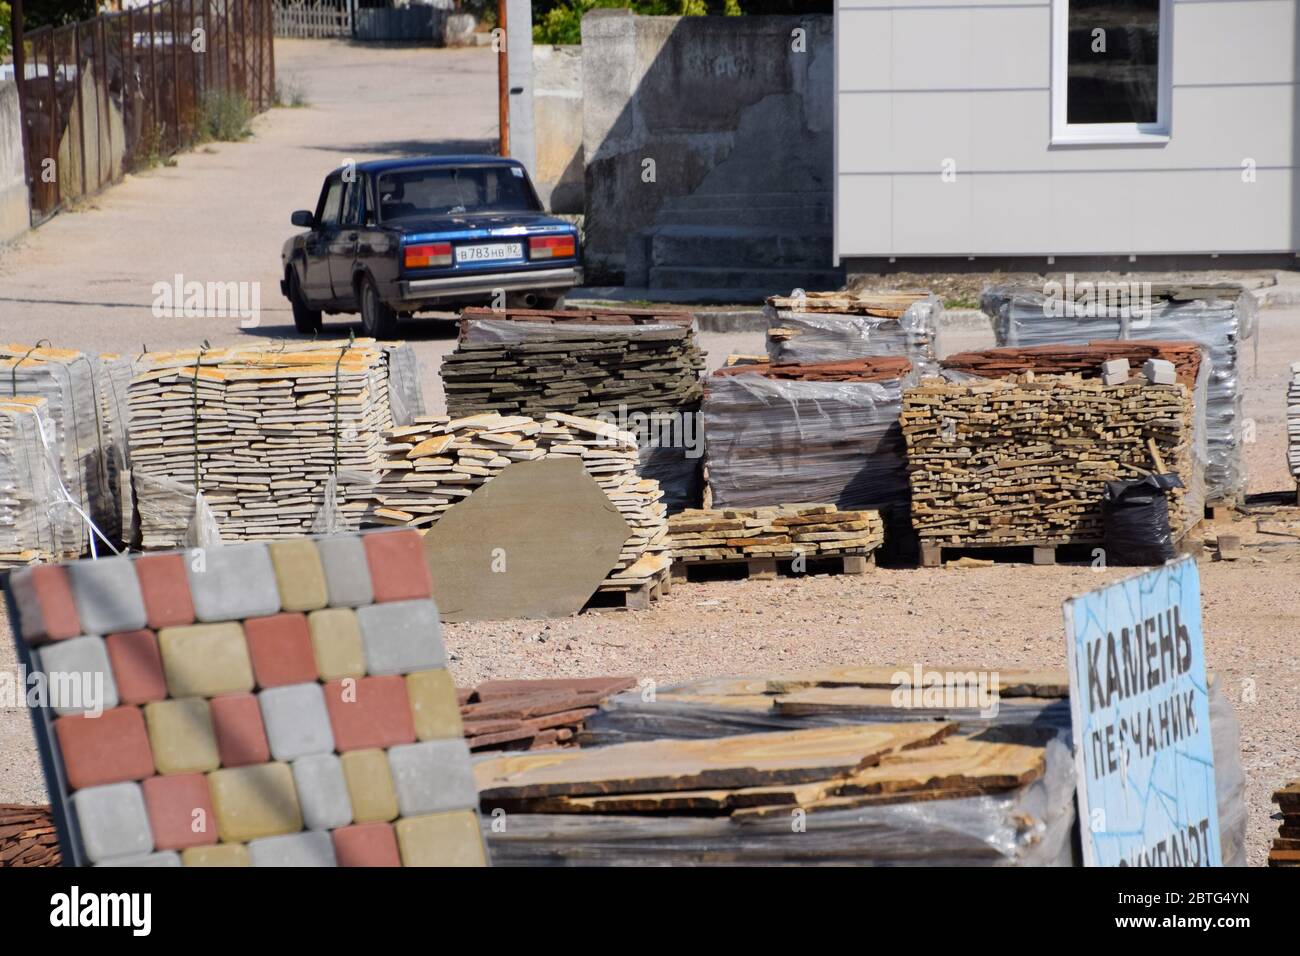 Taman, Russia - June 9, 2019: Warehouse of building materials. a Building base, metal, wood and blocks with bricks. Stock Photo